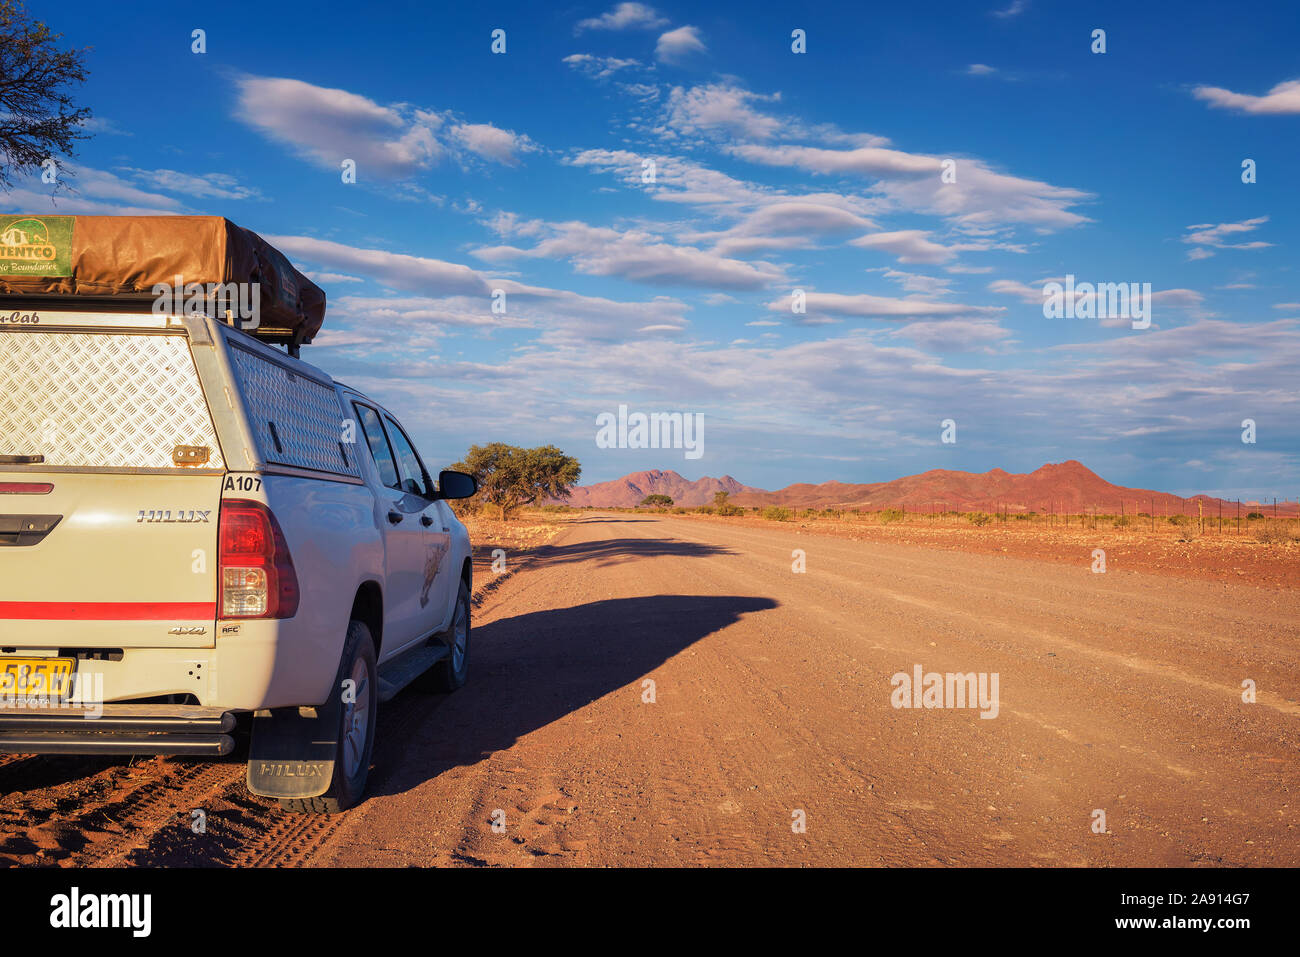 4x4 rental car equipped with a roof tent parks on a dirt road in Namibia Stock Photo